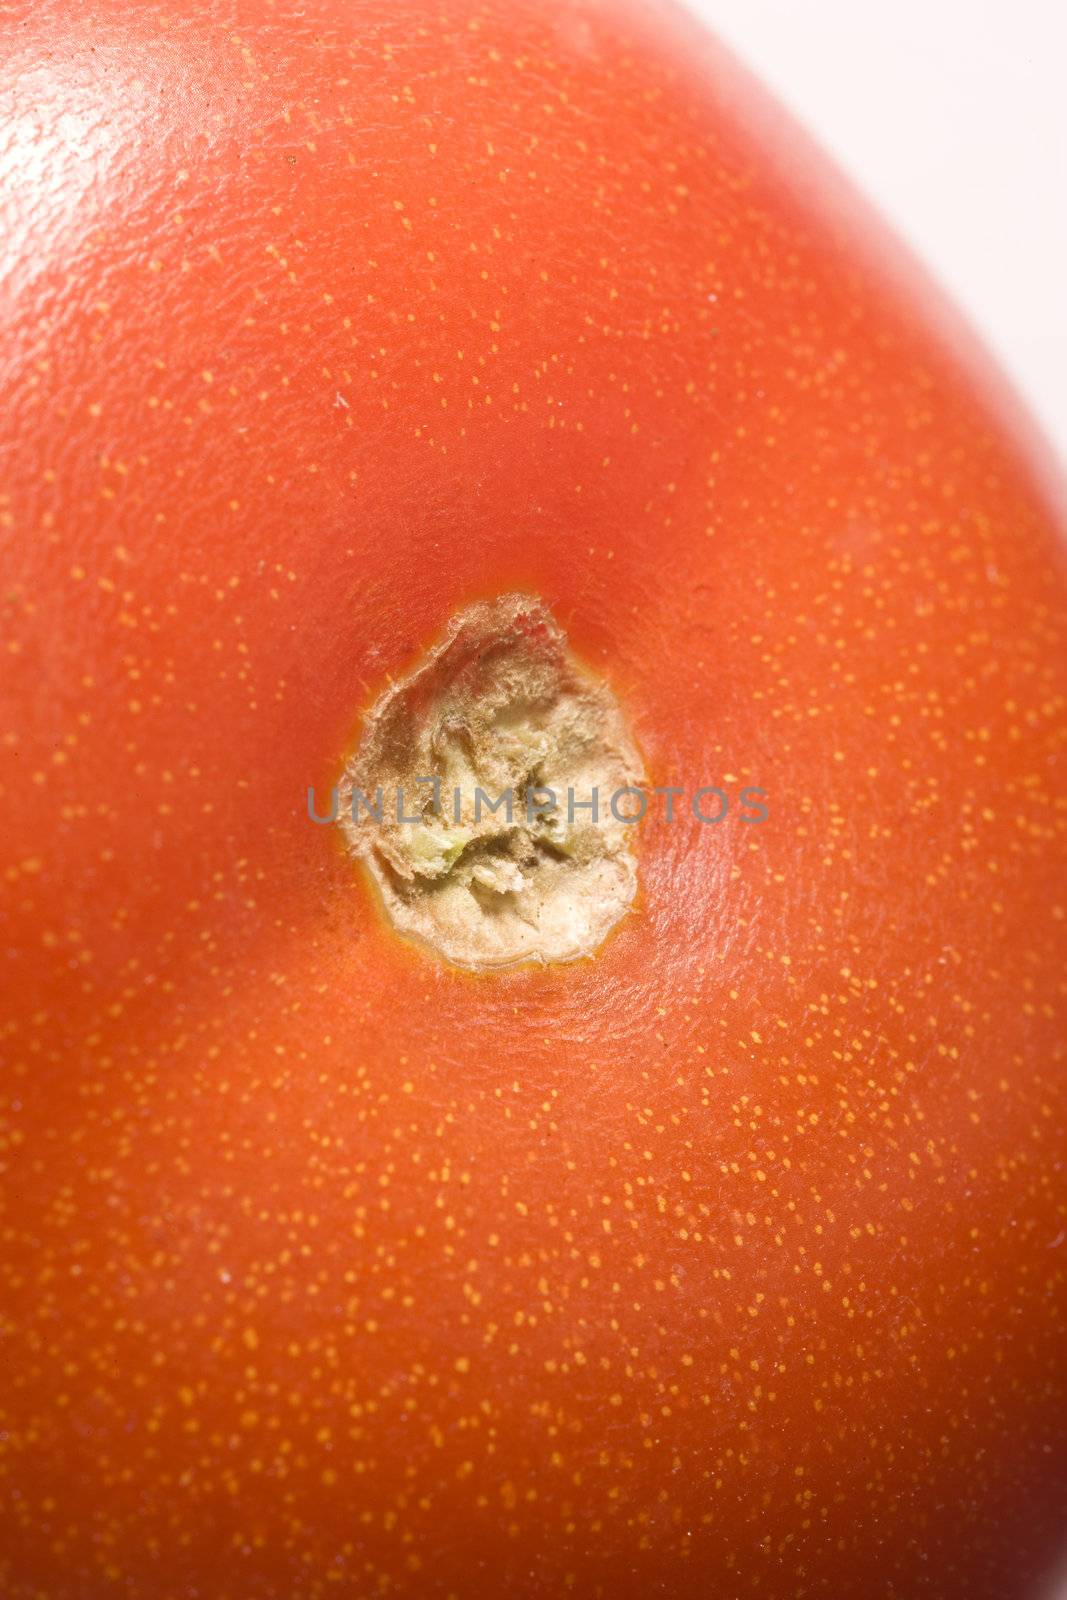 red tomato macro photo isolated with white